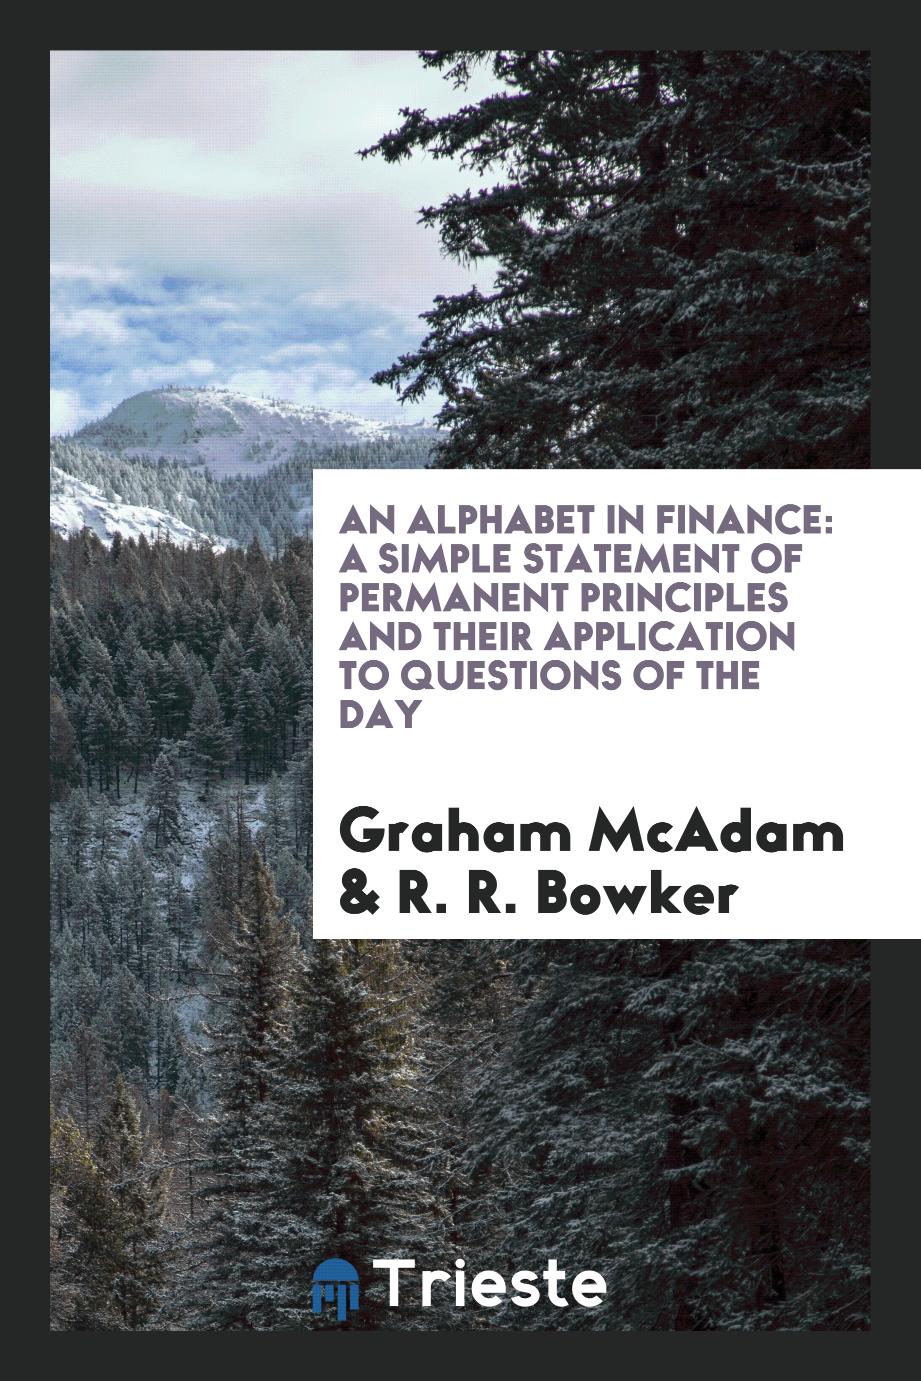 An Alphabet in Finance: A Simple Statement of Permanent Principles and Their Application to Questions of the Day